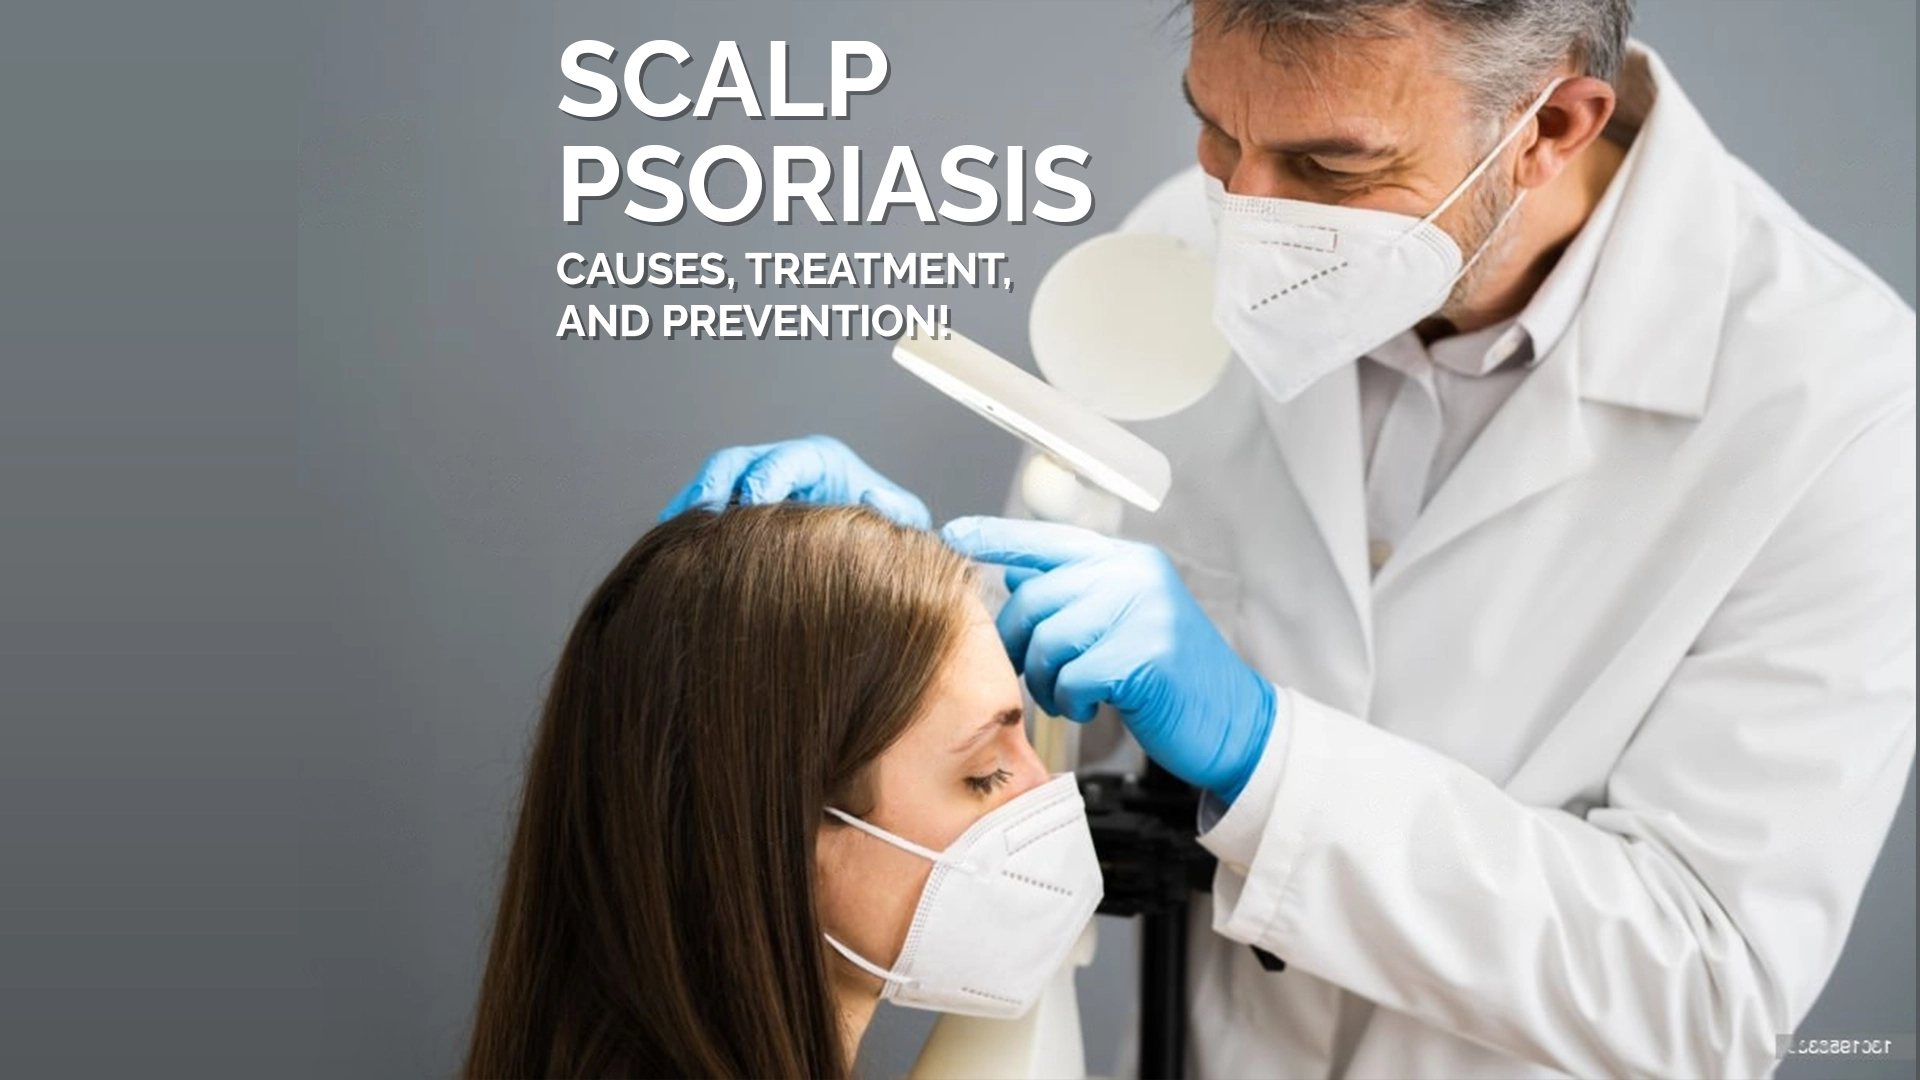 Scalp Psoriasis Causes, Treatment, and Prevention!